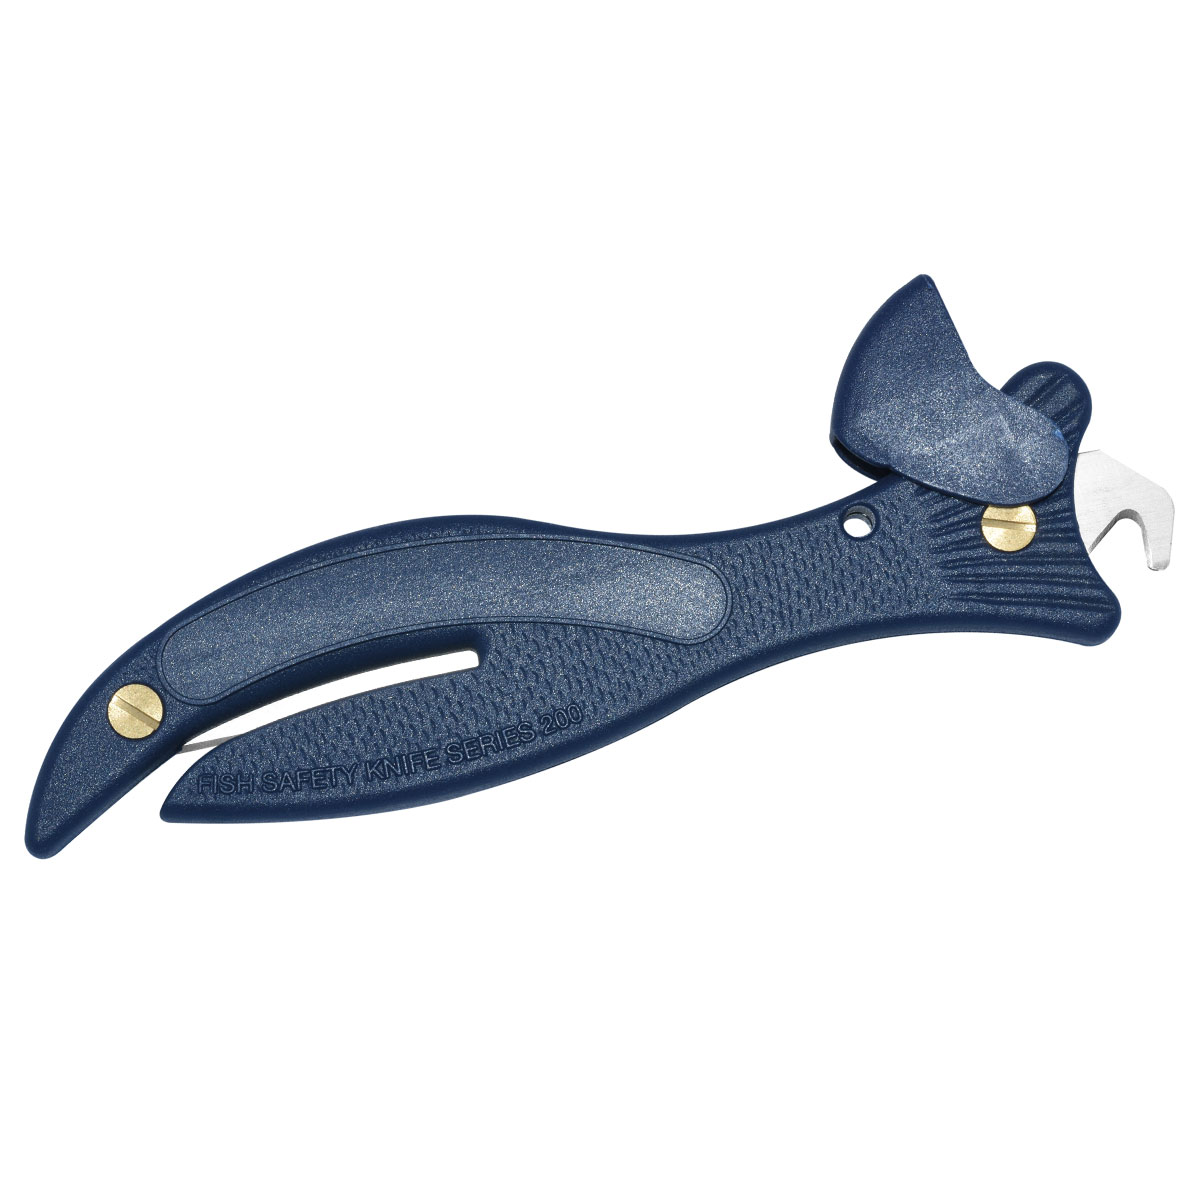 Metal Detectable Fish Safety Knife – Heavy Duty